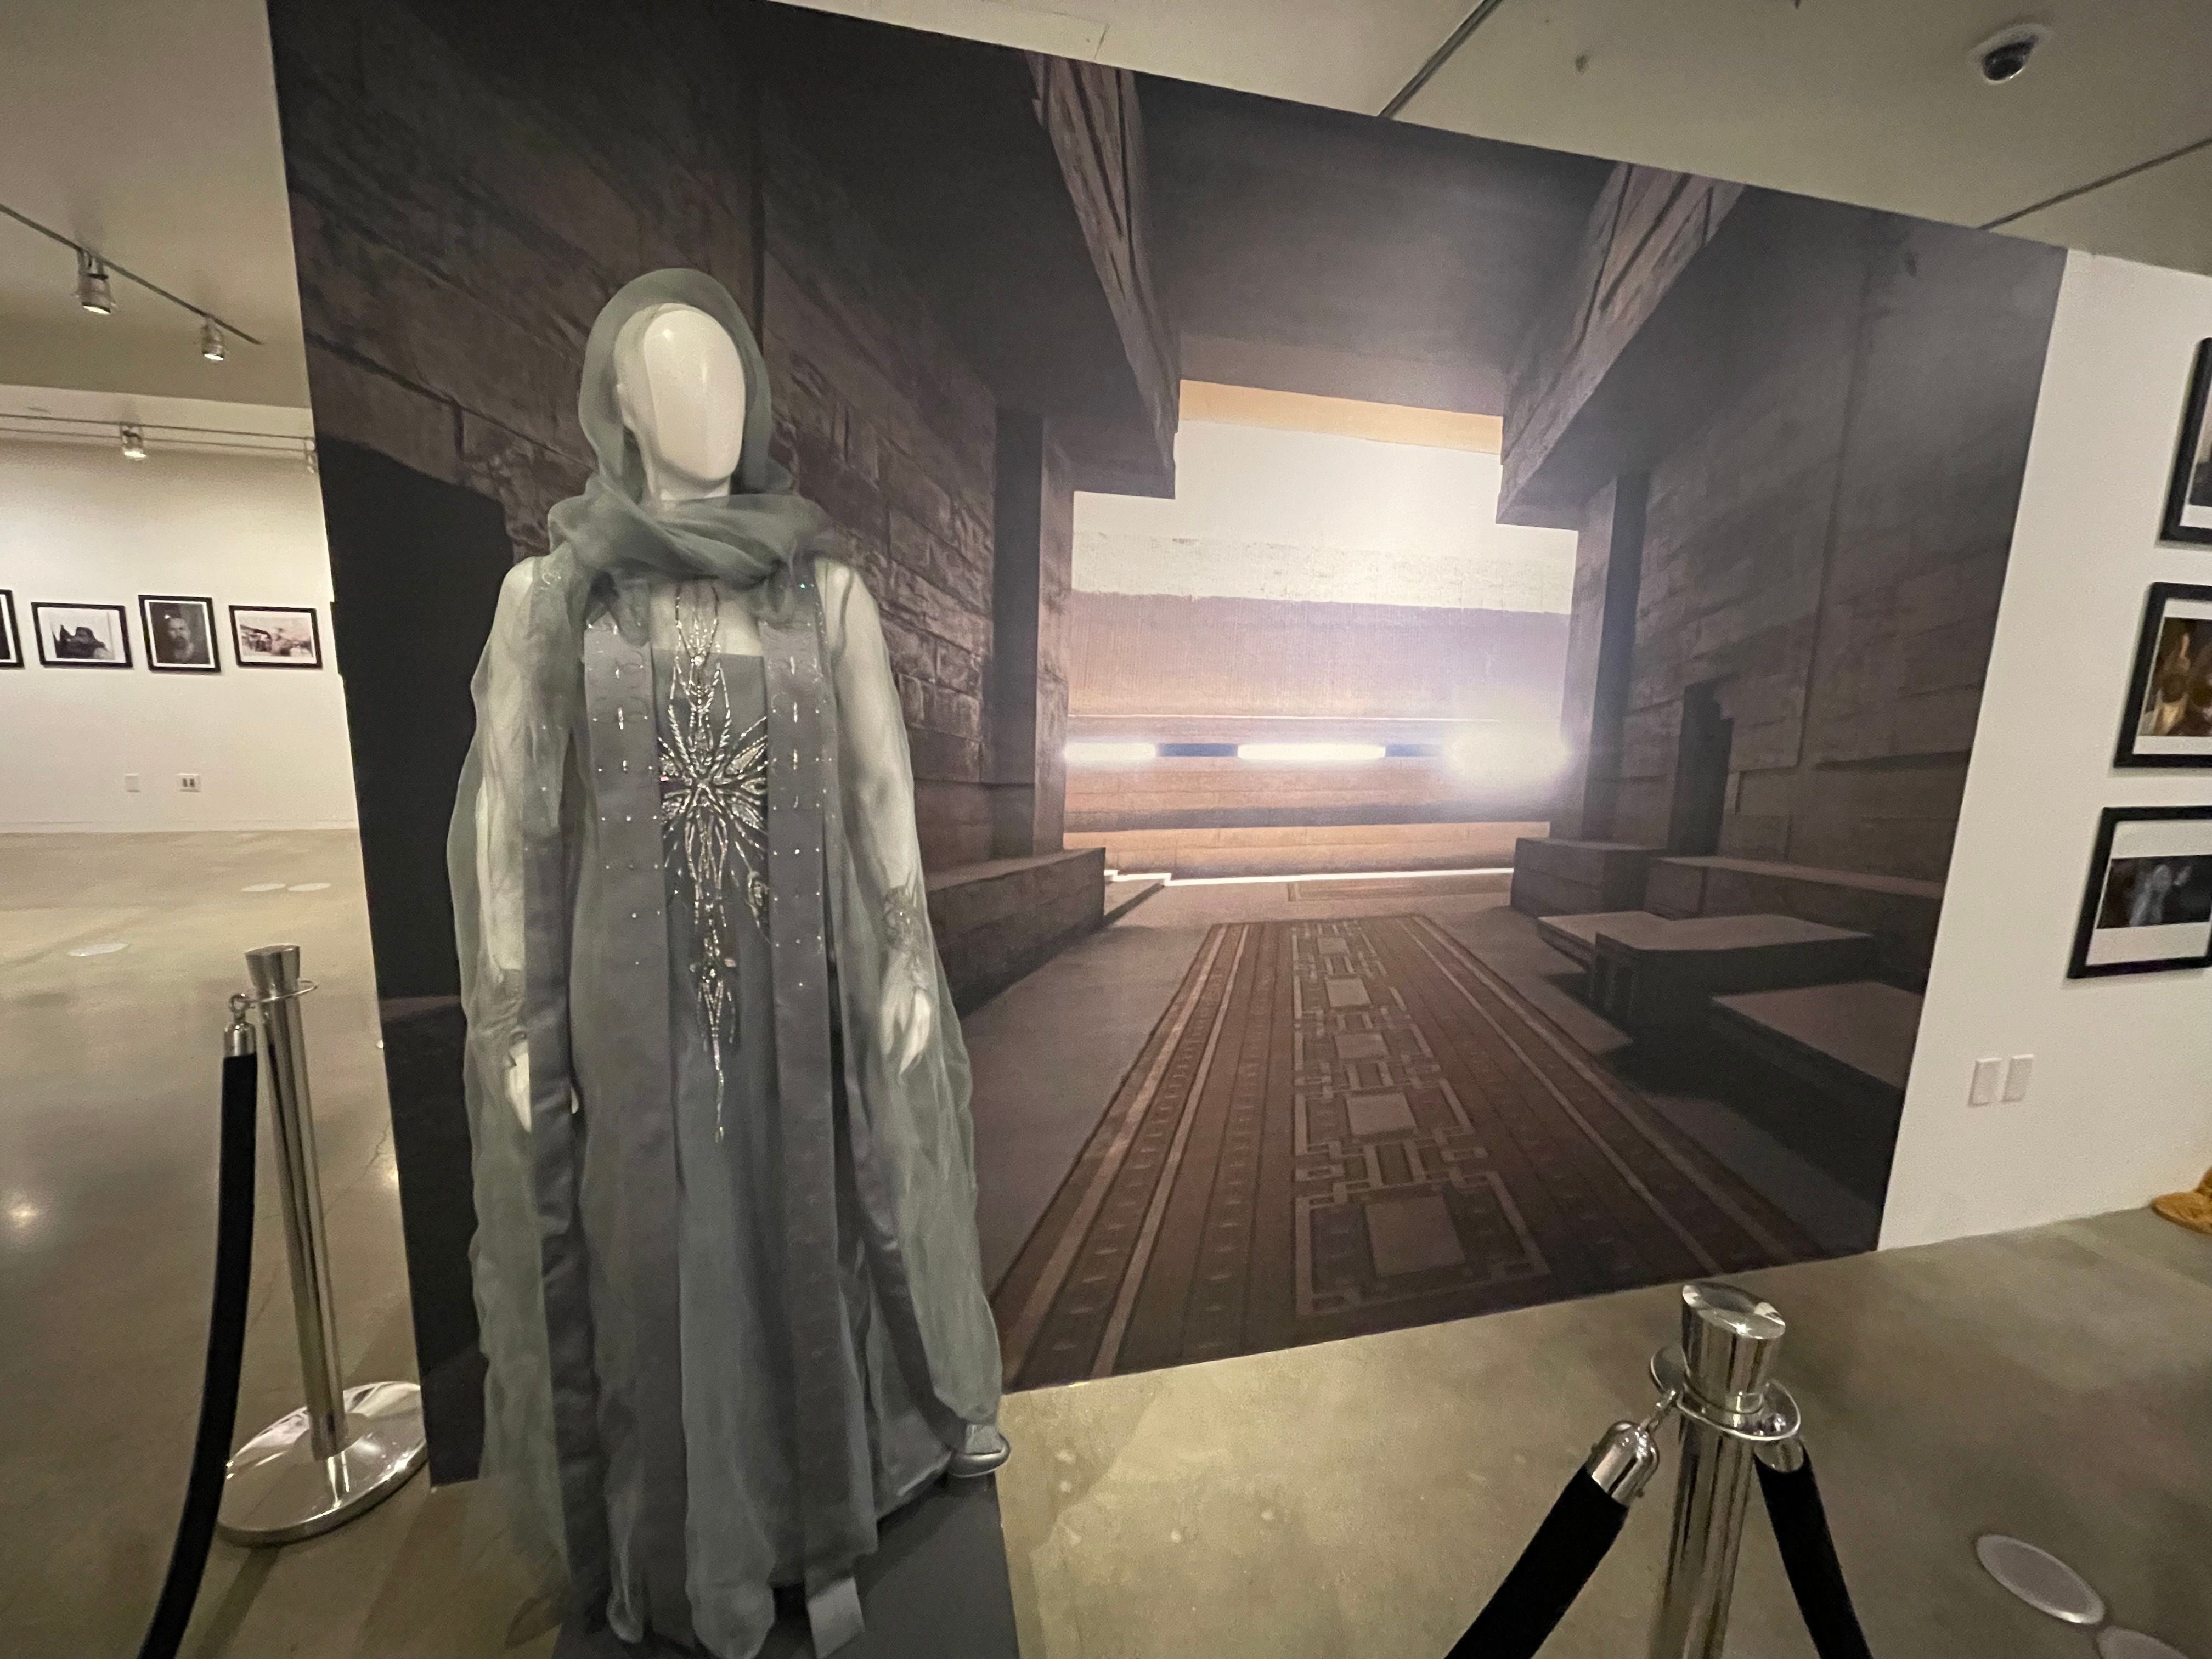 Dune Images Show Detailed Look At Costumes & Test Of Humanity Prop